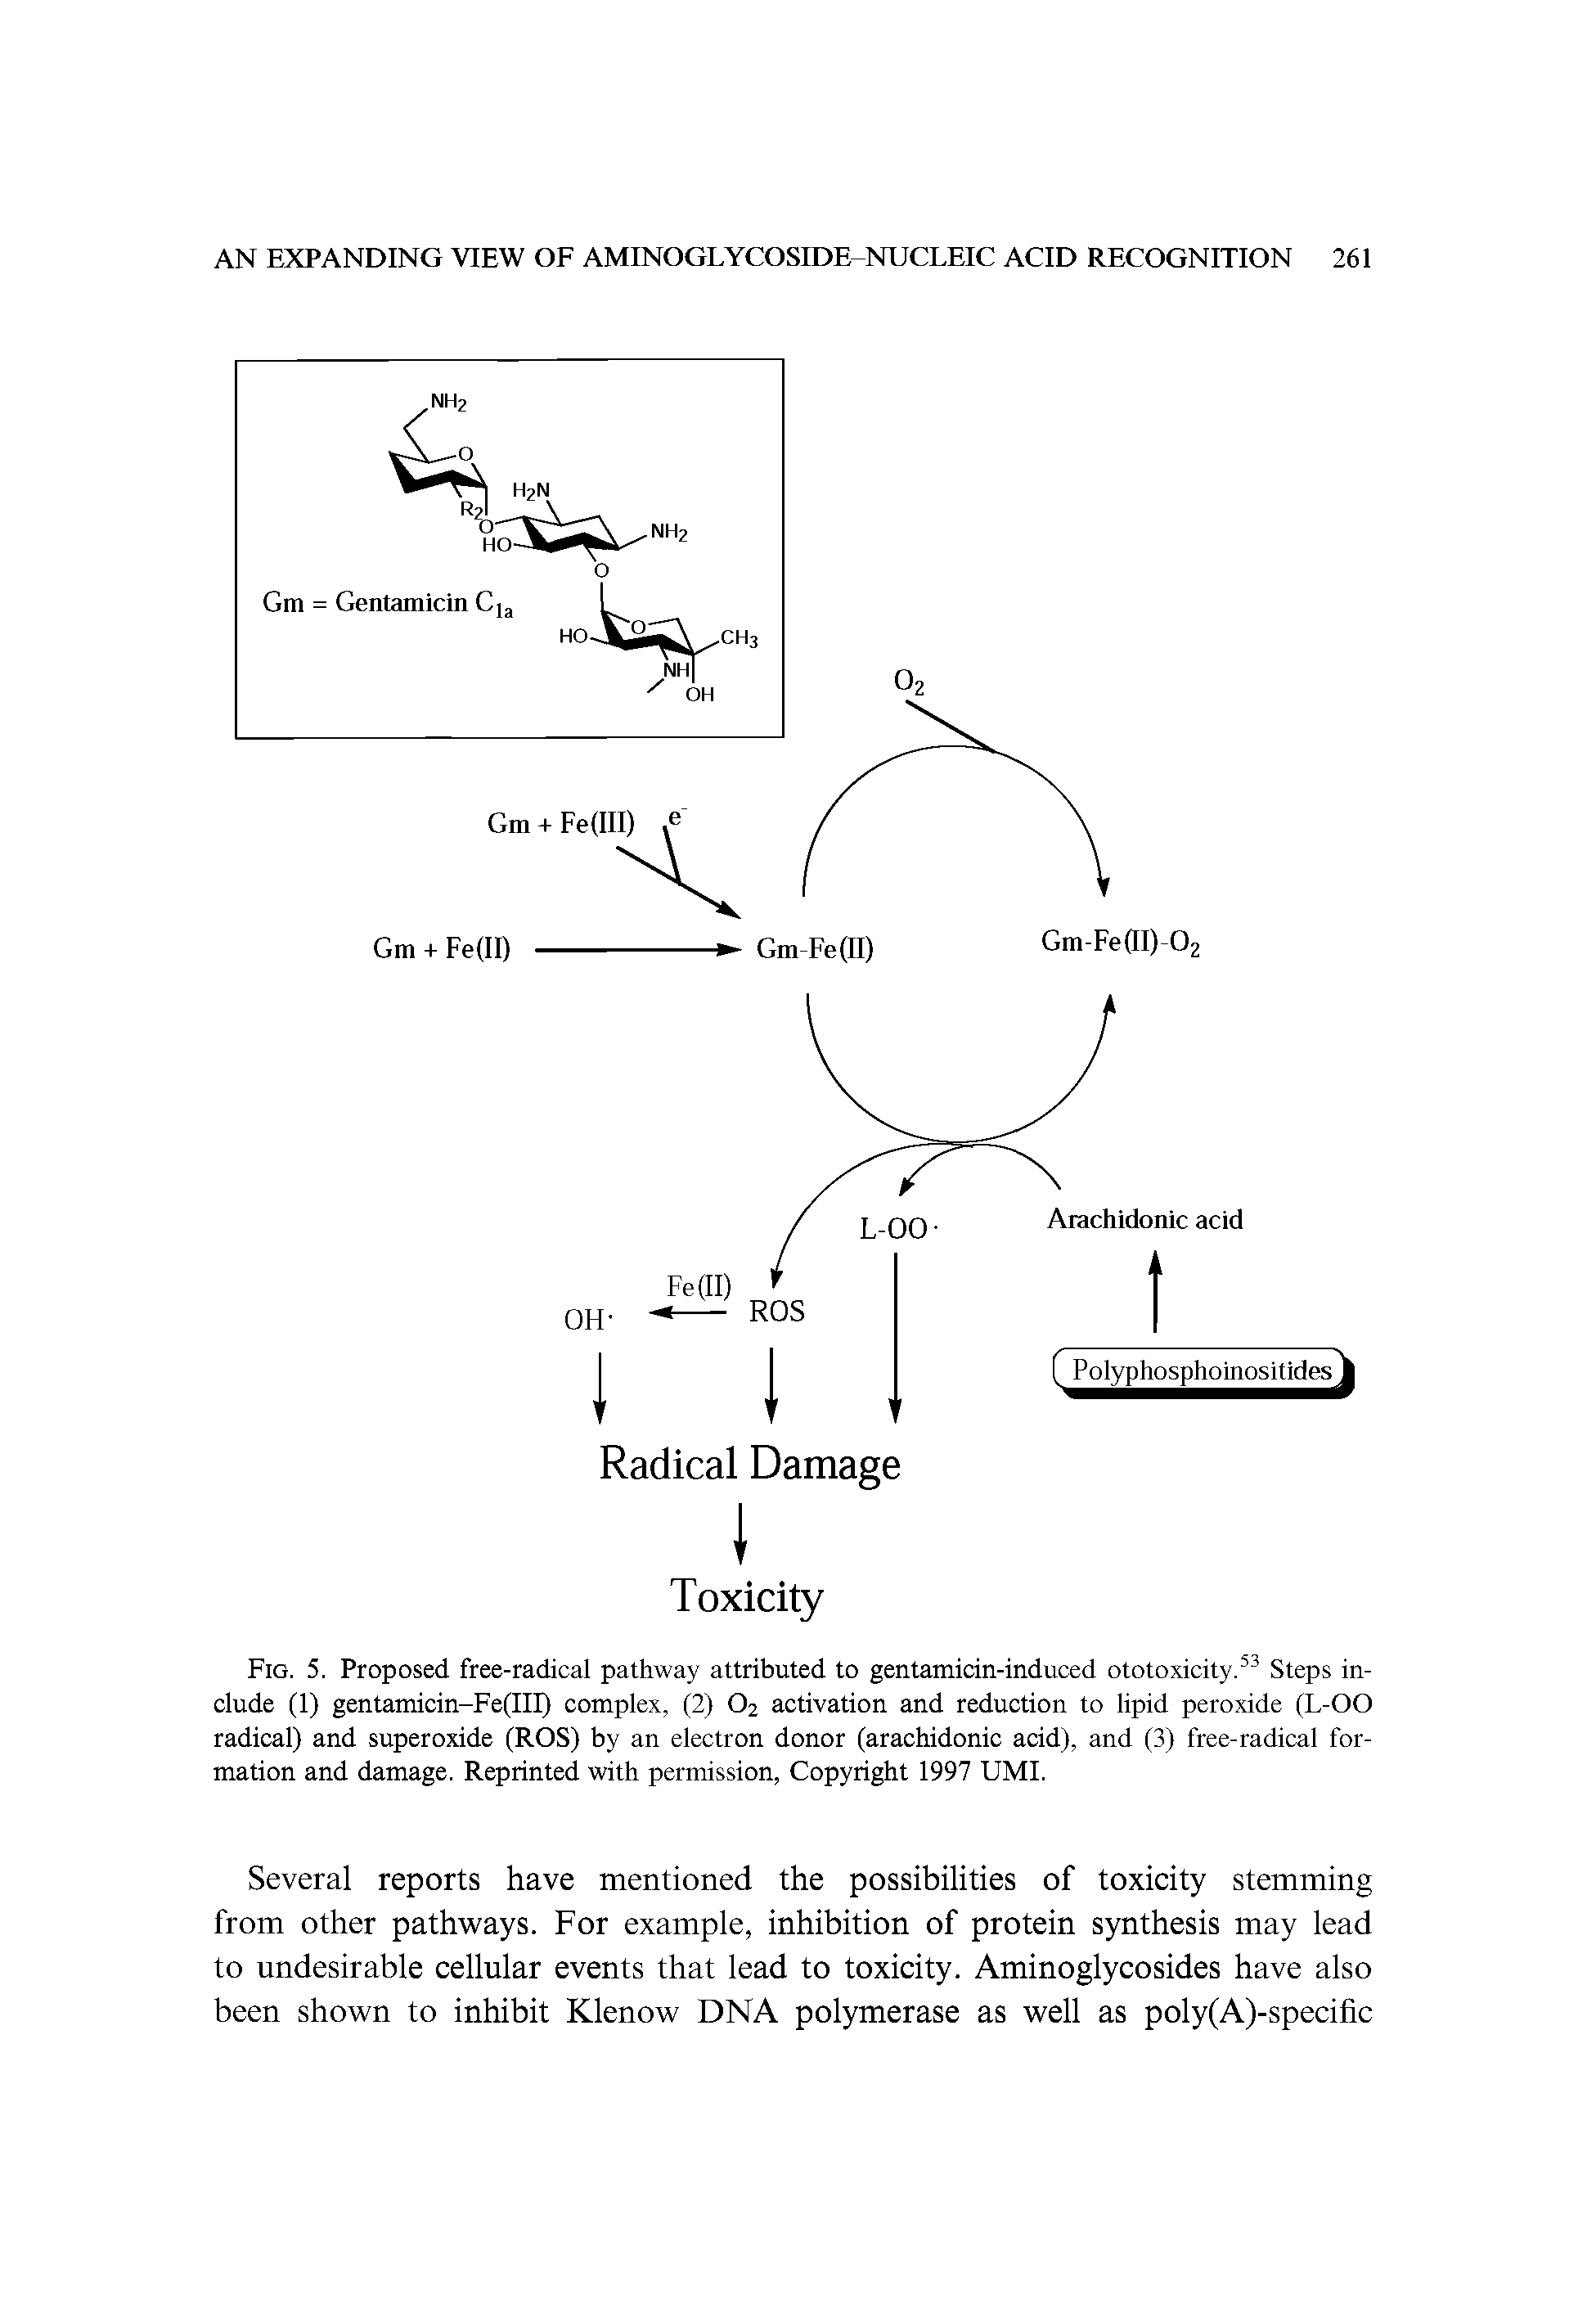 Fig. 5. Proposed free-radical pathway attributed to gentamicin-induced ototoxicity. Steps include (1) gentamicin-Fe(III) complex, (2) O2 activation and reduction to lipid peroxide (L-OO radical) and superoxide (ROS) by an electron donor (arachidonic acid), and (3) free-radical formation and damage. Reprinted with permission, Copyright 1997 UMI.